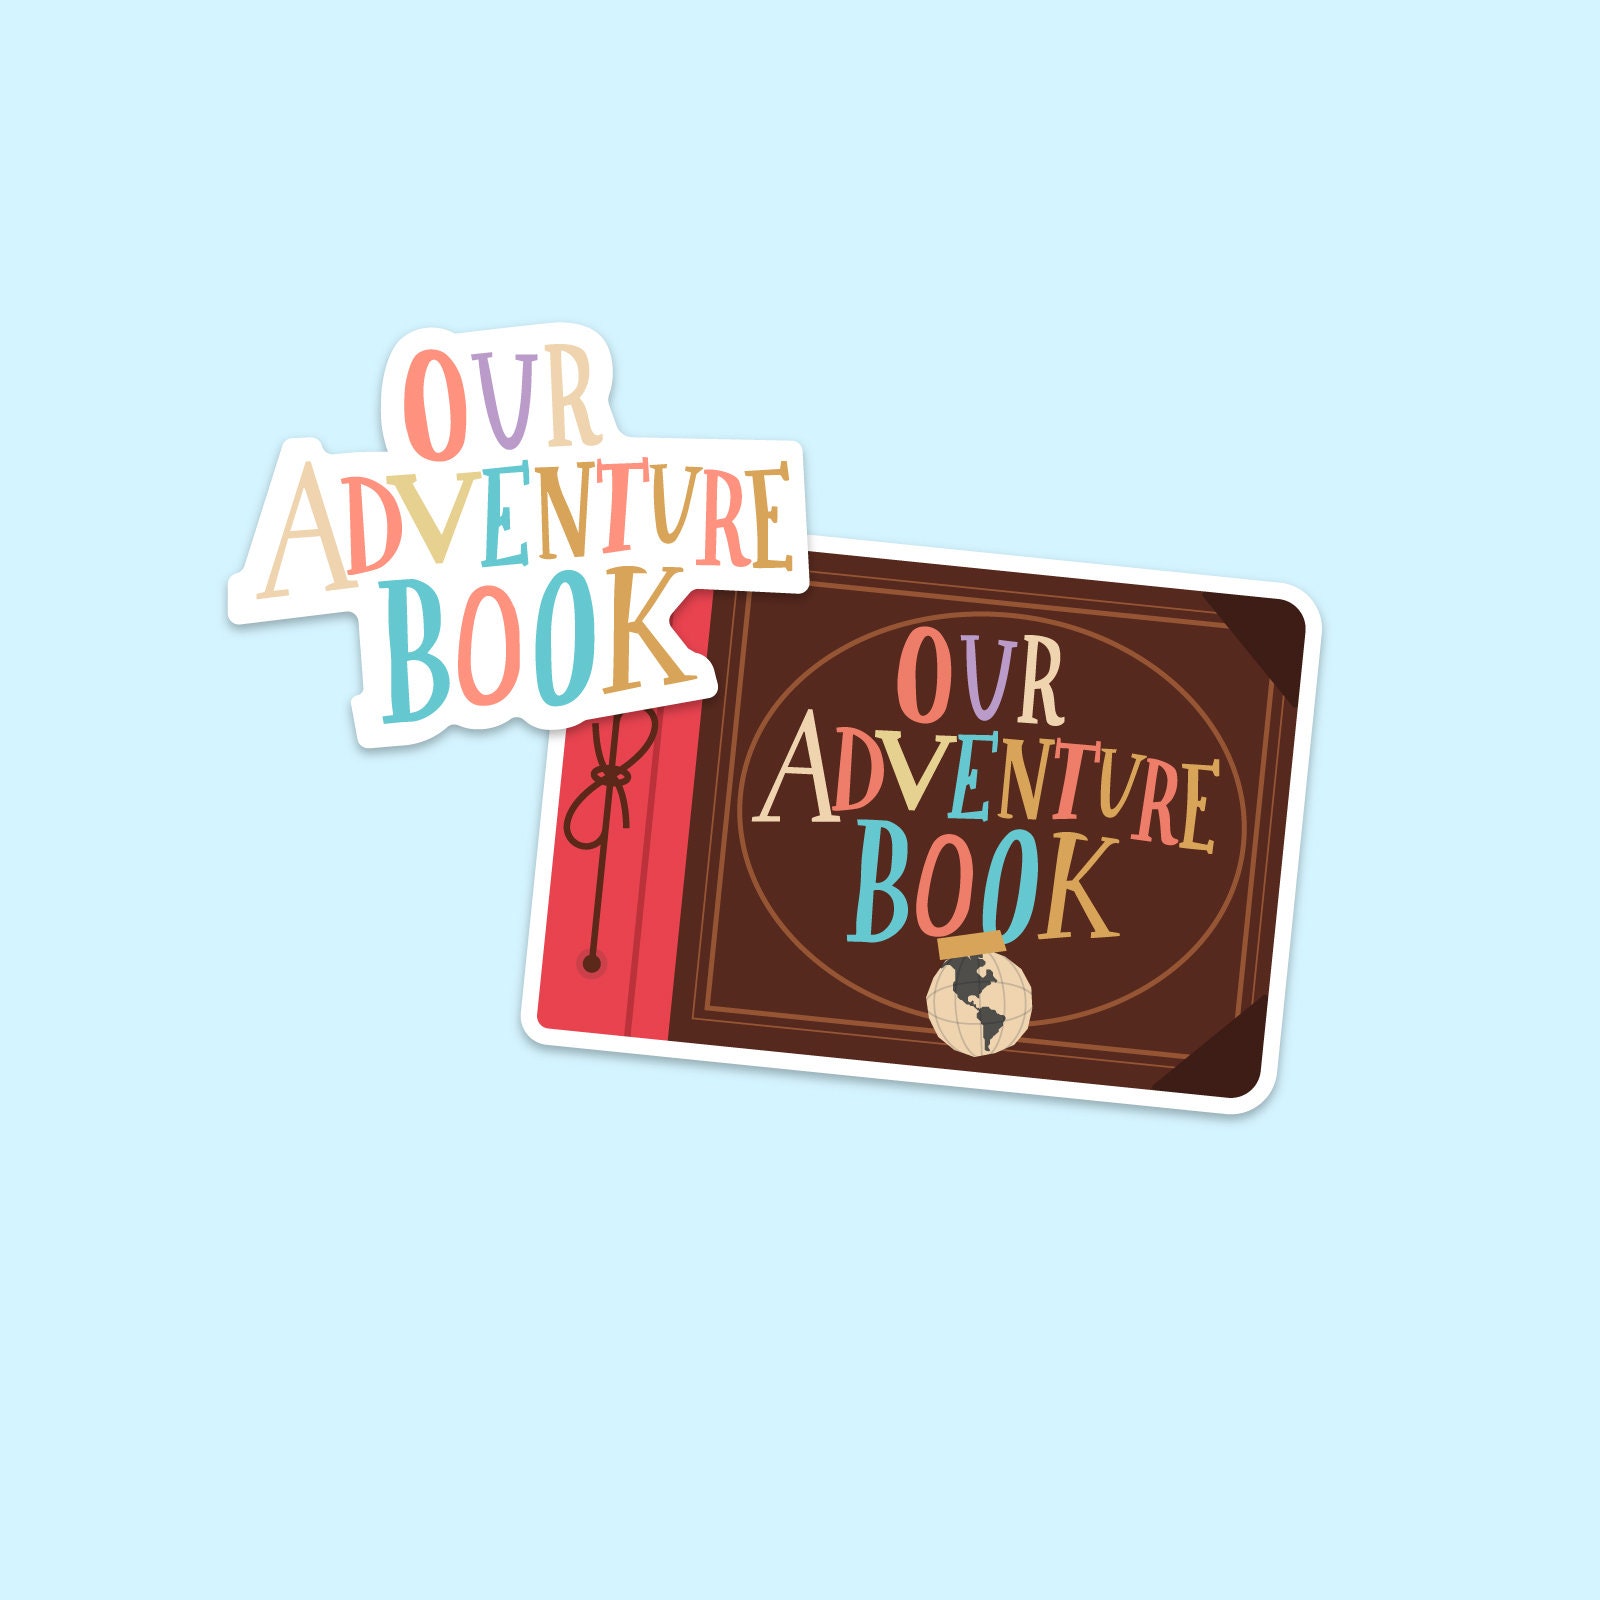 Pixar UP Our Adventure Book/Fund Sticker/Decal (Decoration) (PDF/PNG)